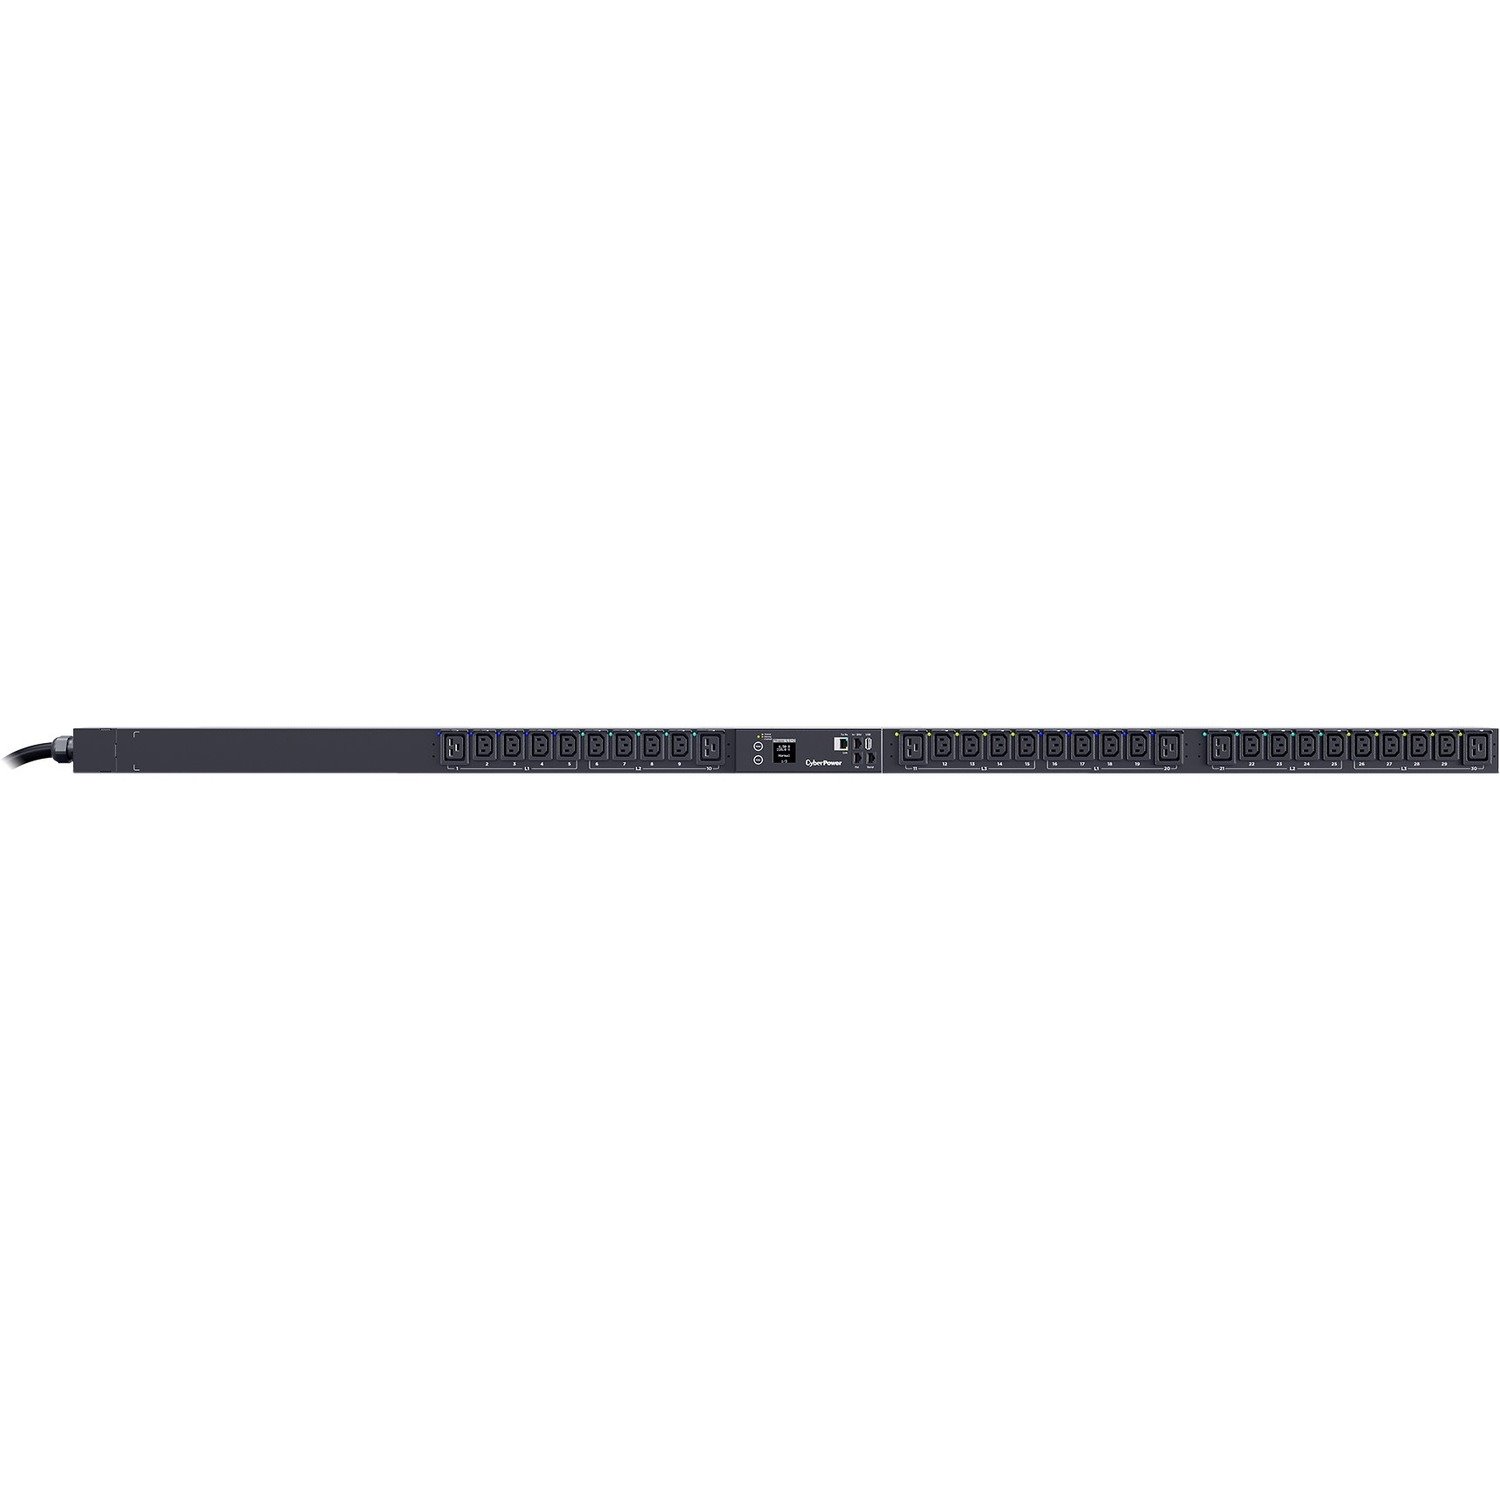 CyberPower PDU83111 3 Phase 200 - 240 VAC 20A Switched Metered-by-Outlet PDU